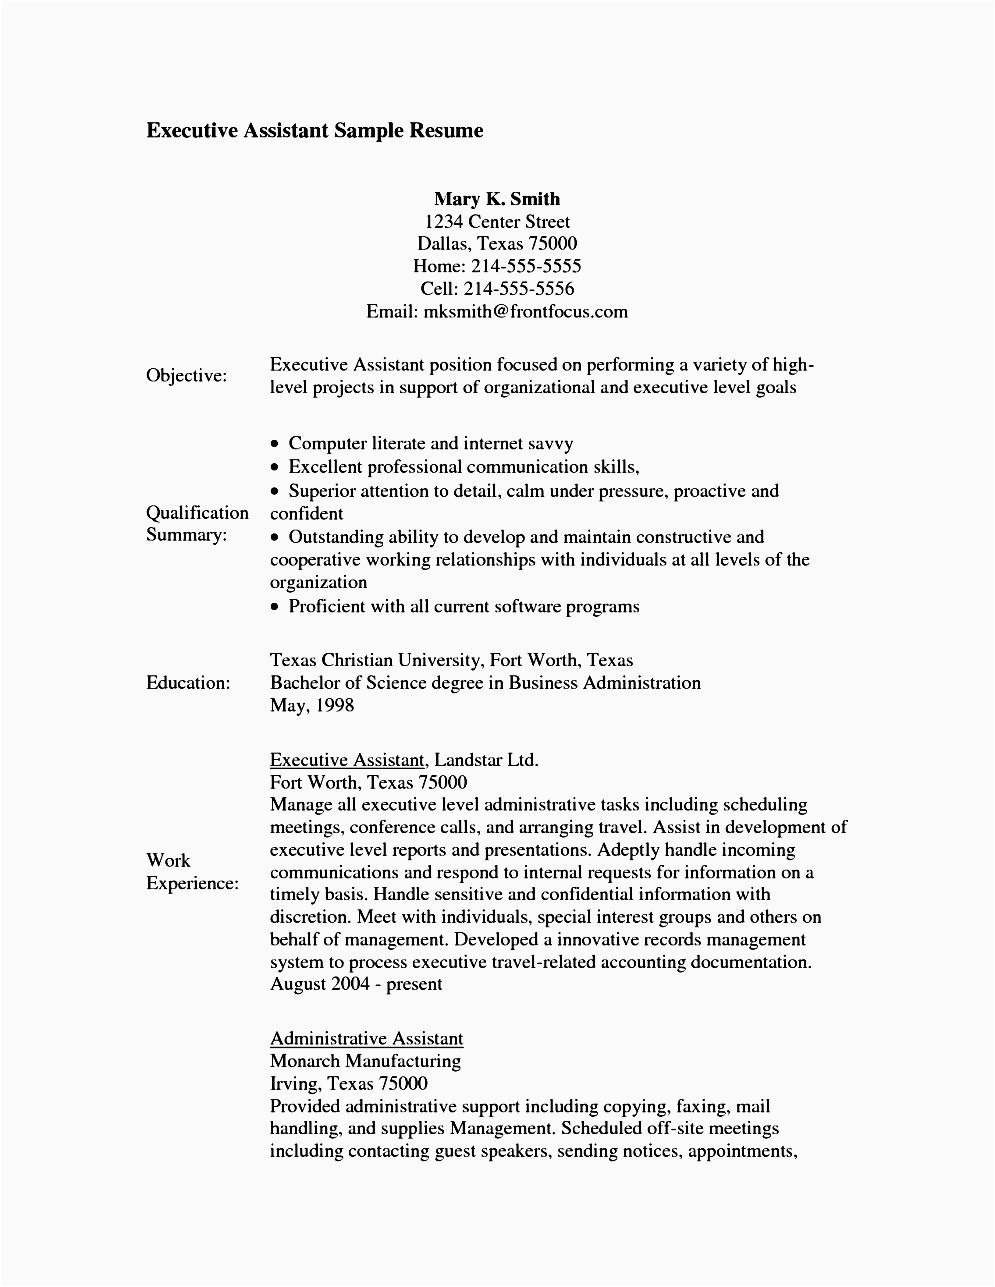 executive assistant resume objective